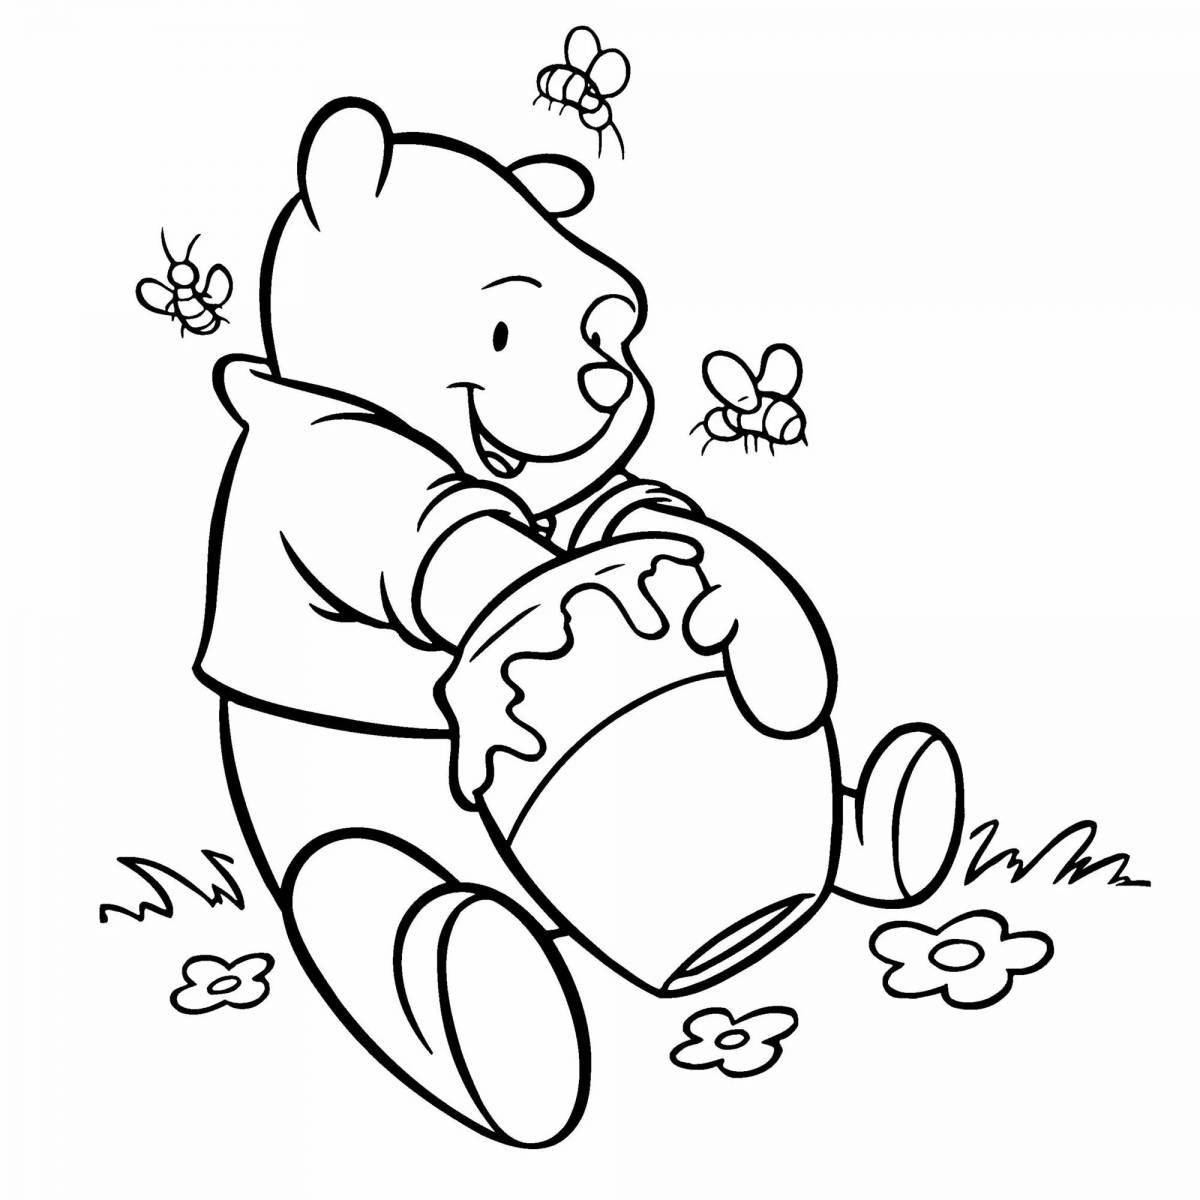 Winnie the pooh creative coloring